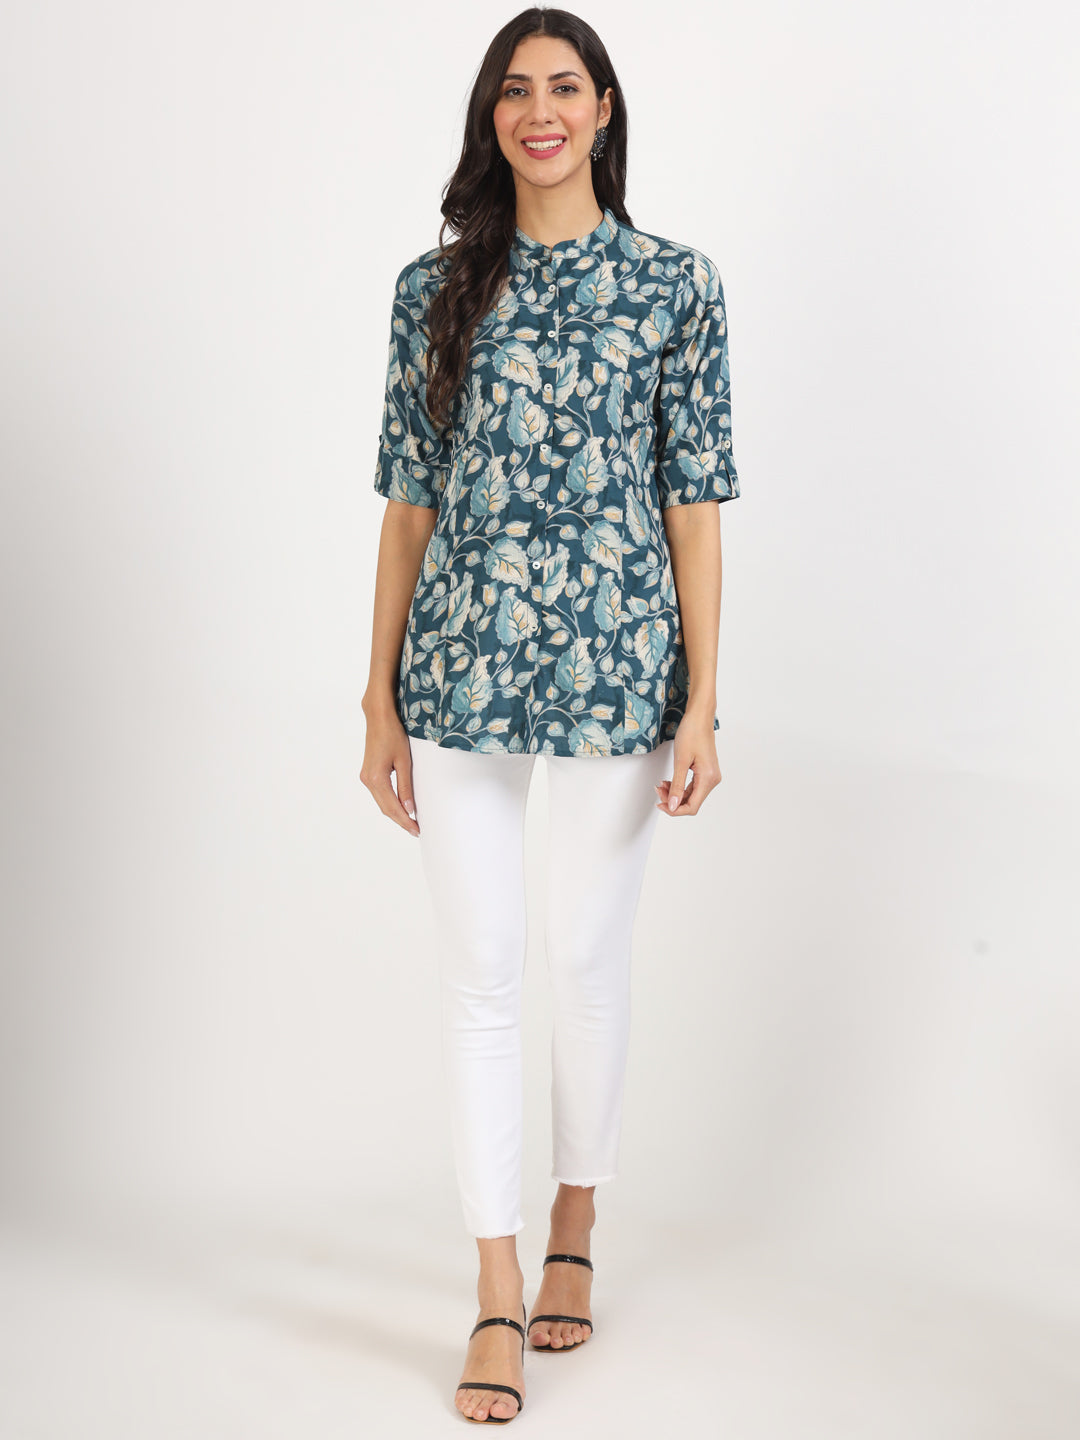 Divena Bottle Green Floral Printed Rayon Top